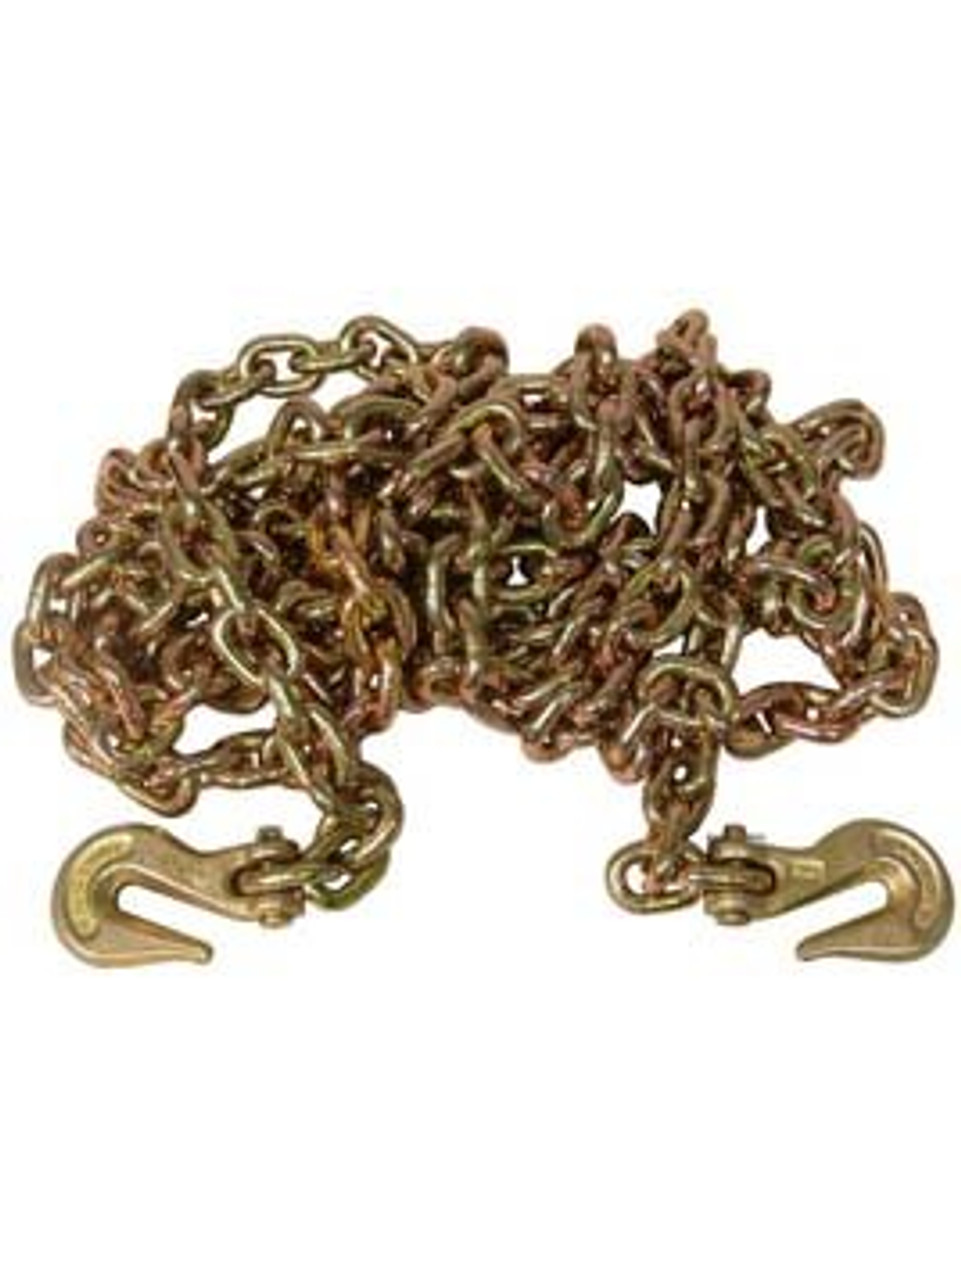 G7038X20 --- 3/8" Transport Chain Assembly with 3/8" Clevis Grab Hooks on Both Ends - Grade 70